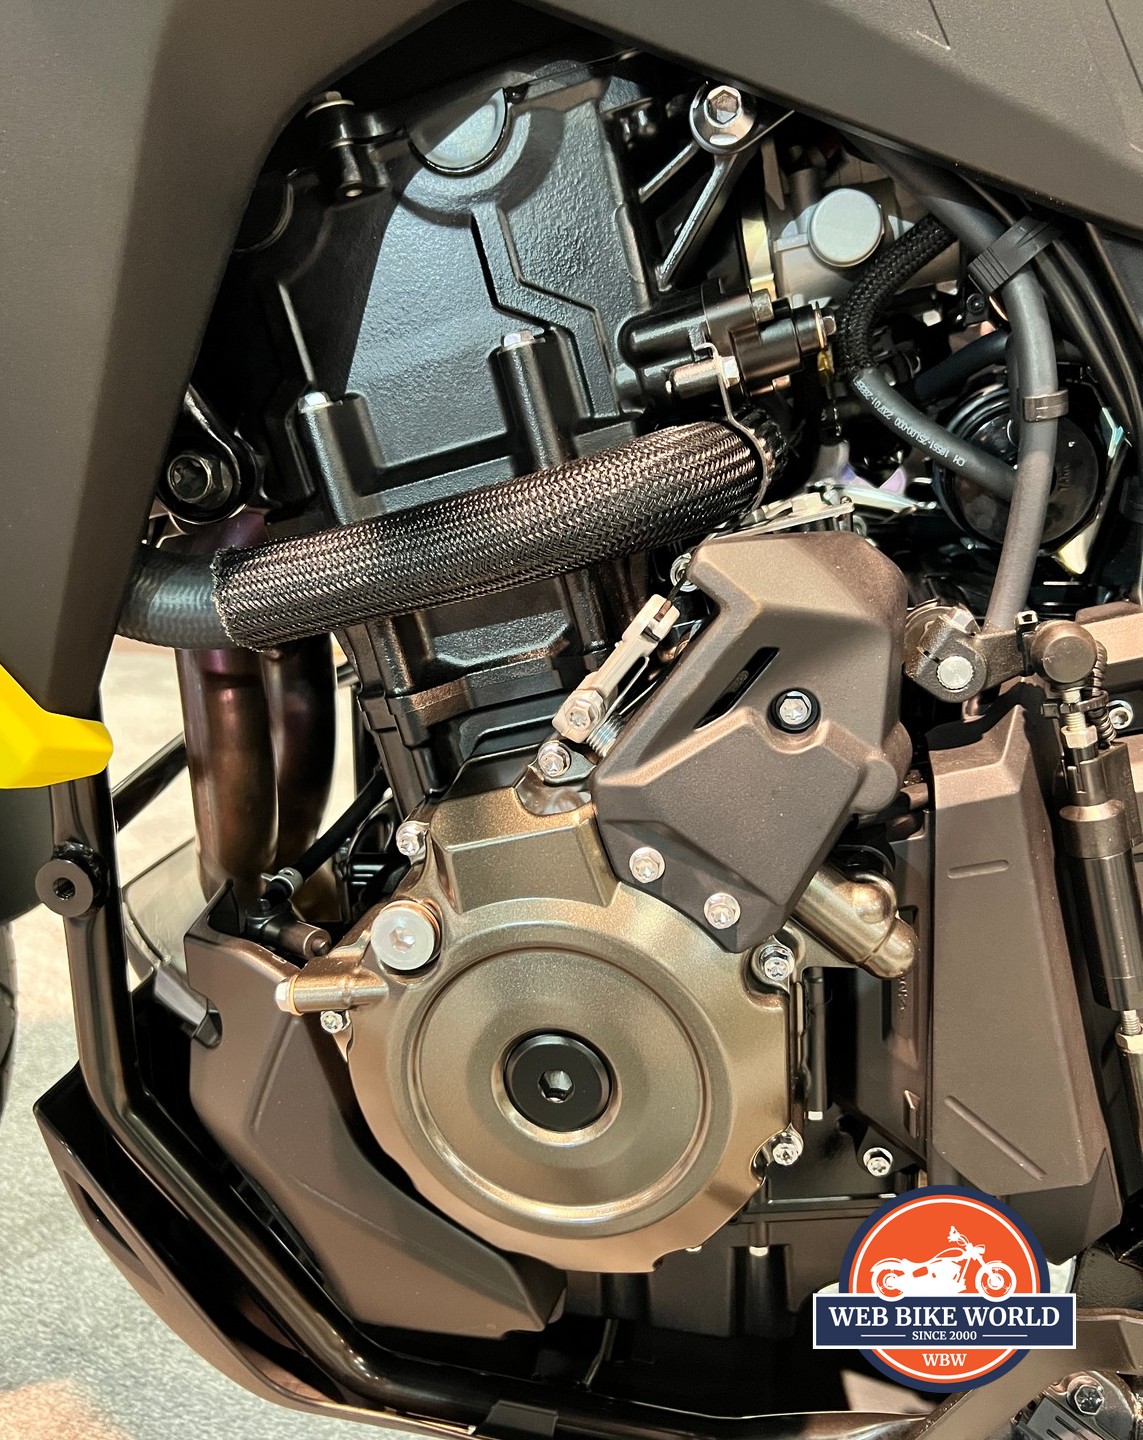 This all-new parallel-twin 776cc engine will power the Suzuki V-Strom 800DE.